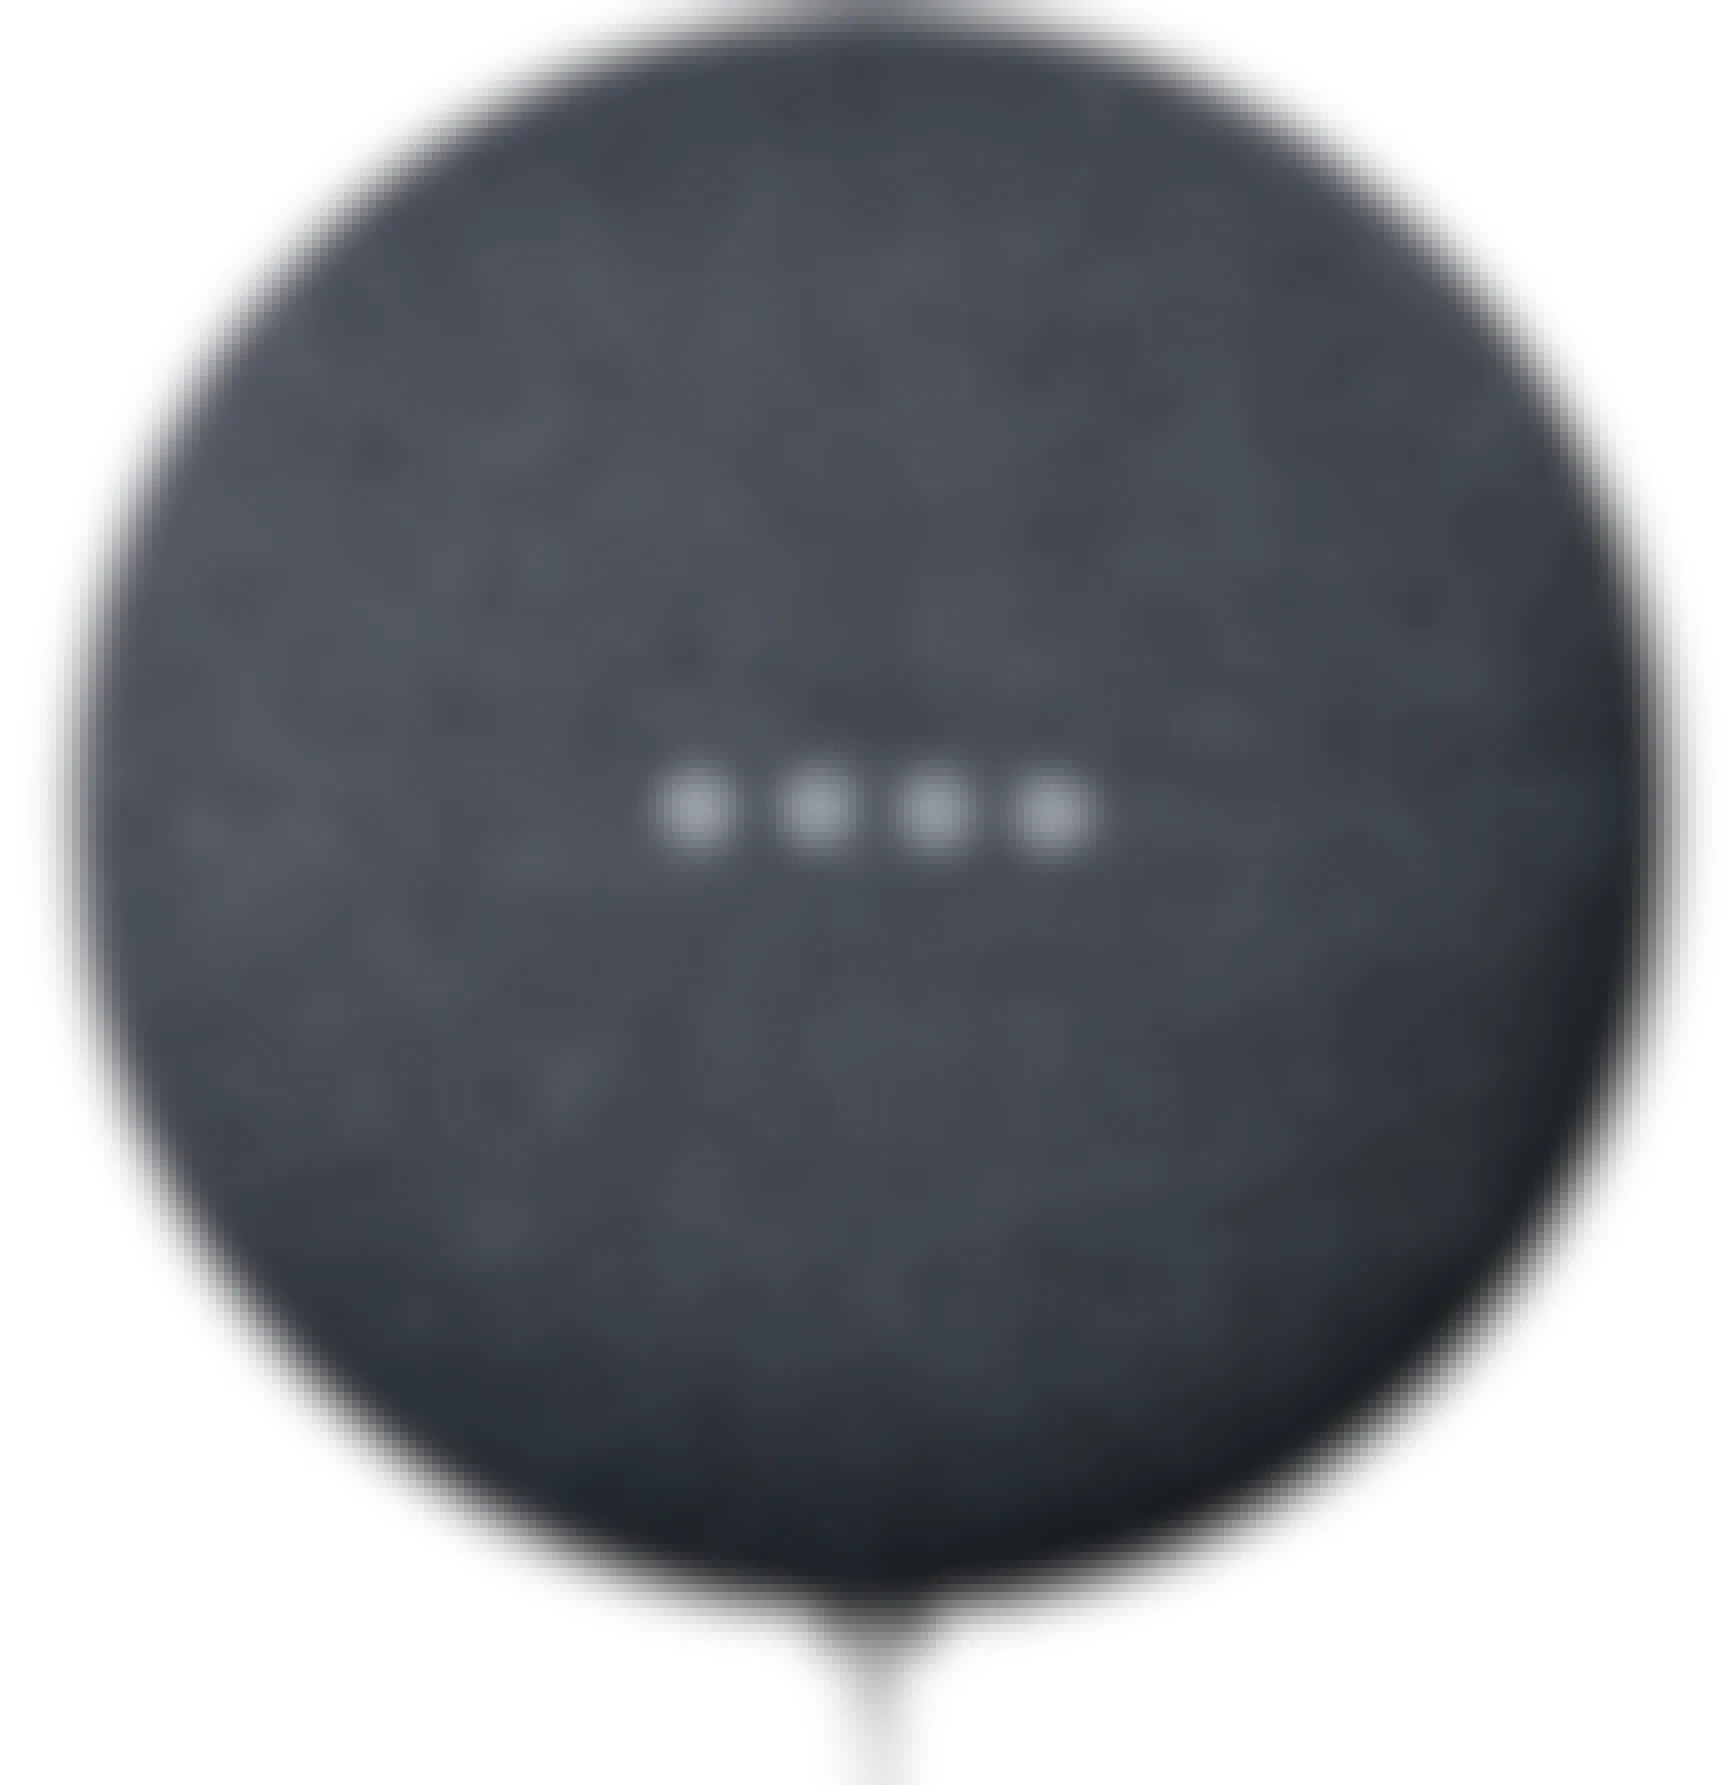 A Nest Mini with Google Assistant 